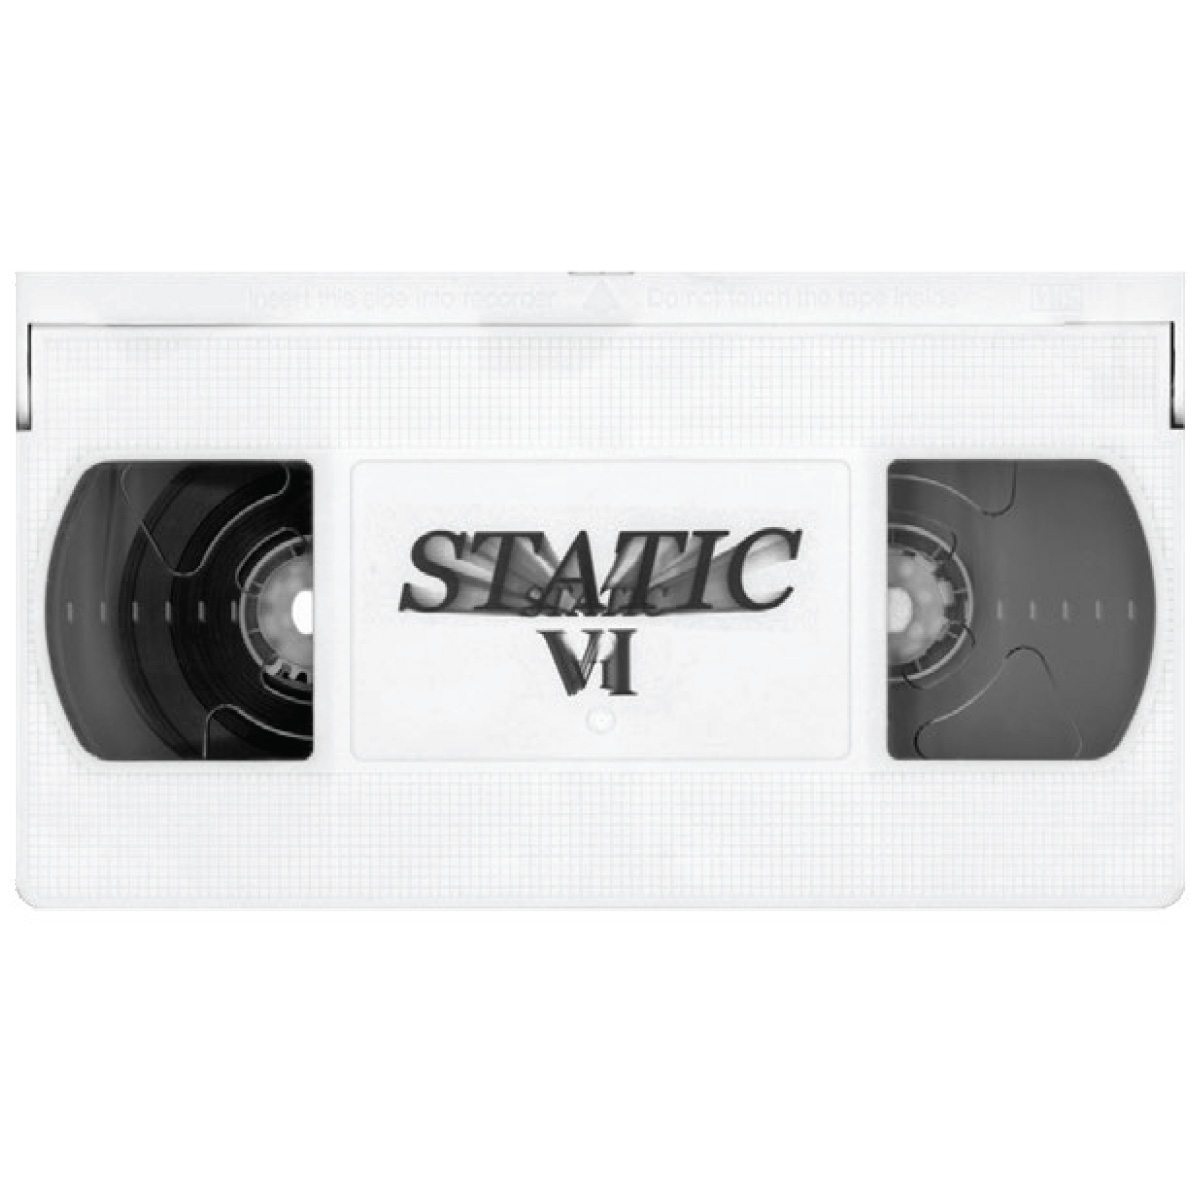 Static VI Limited Edition White Vhs